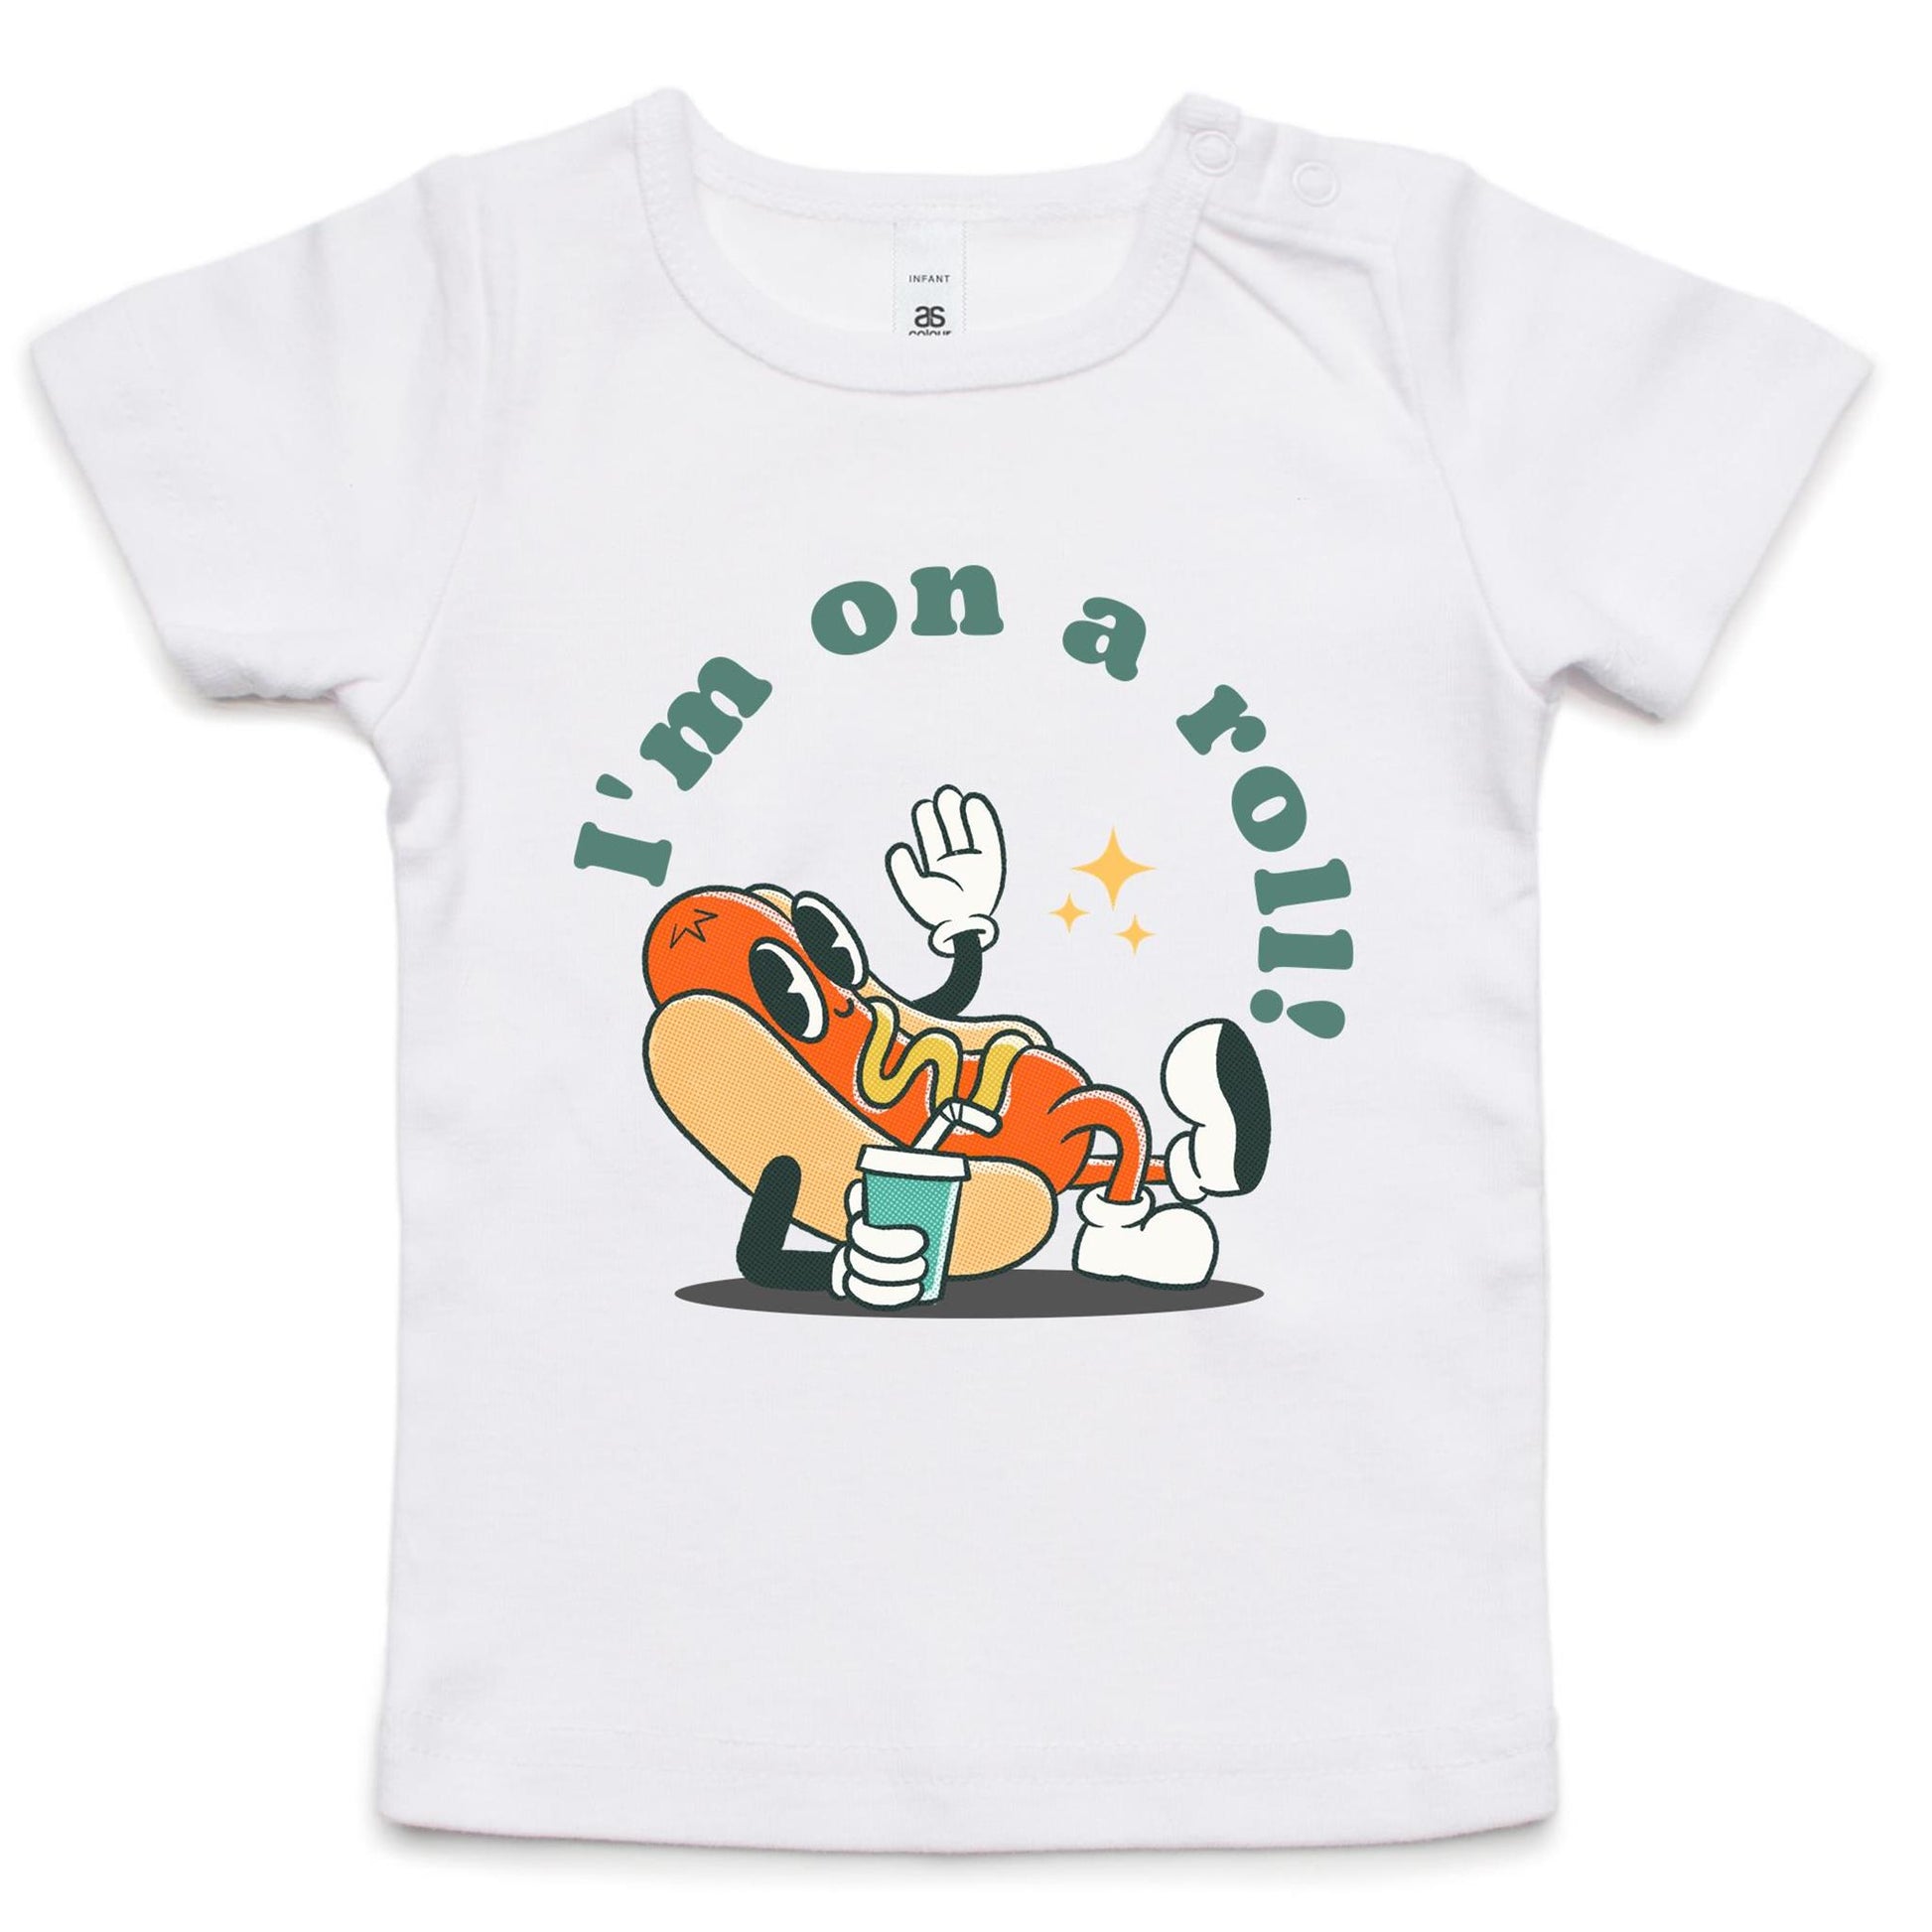 Hot Dog, I'm On A Roll - Baby T-shirt White Baby T-shirt Food